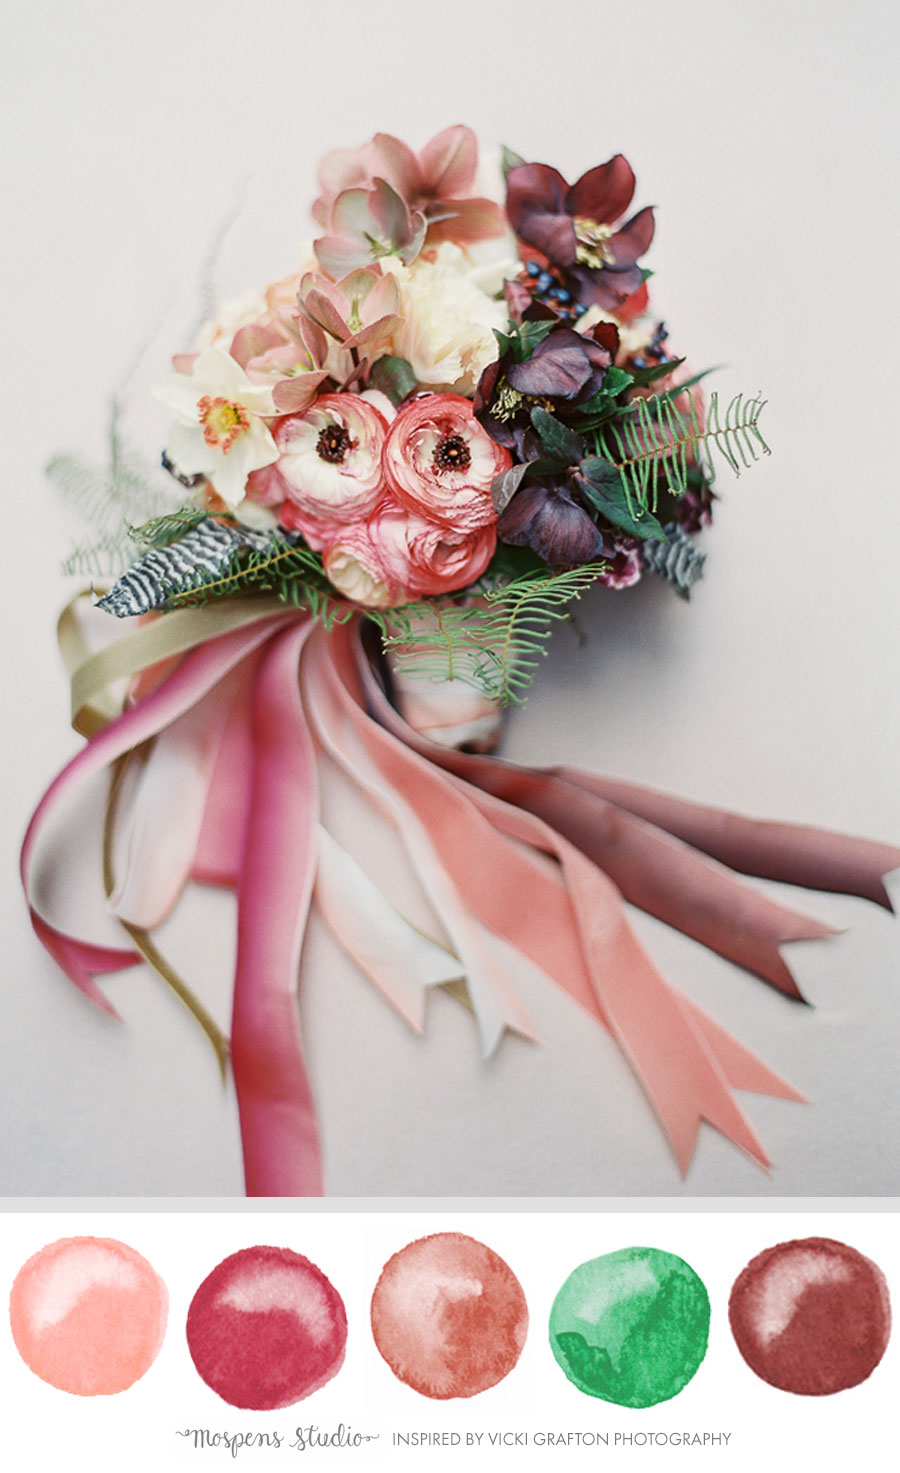 Beautiful! Loving this copper, peach, mauve pink, red and bright green wedding color inspo. - Mospens Studio